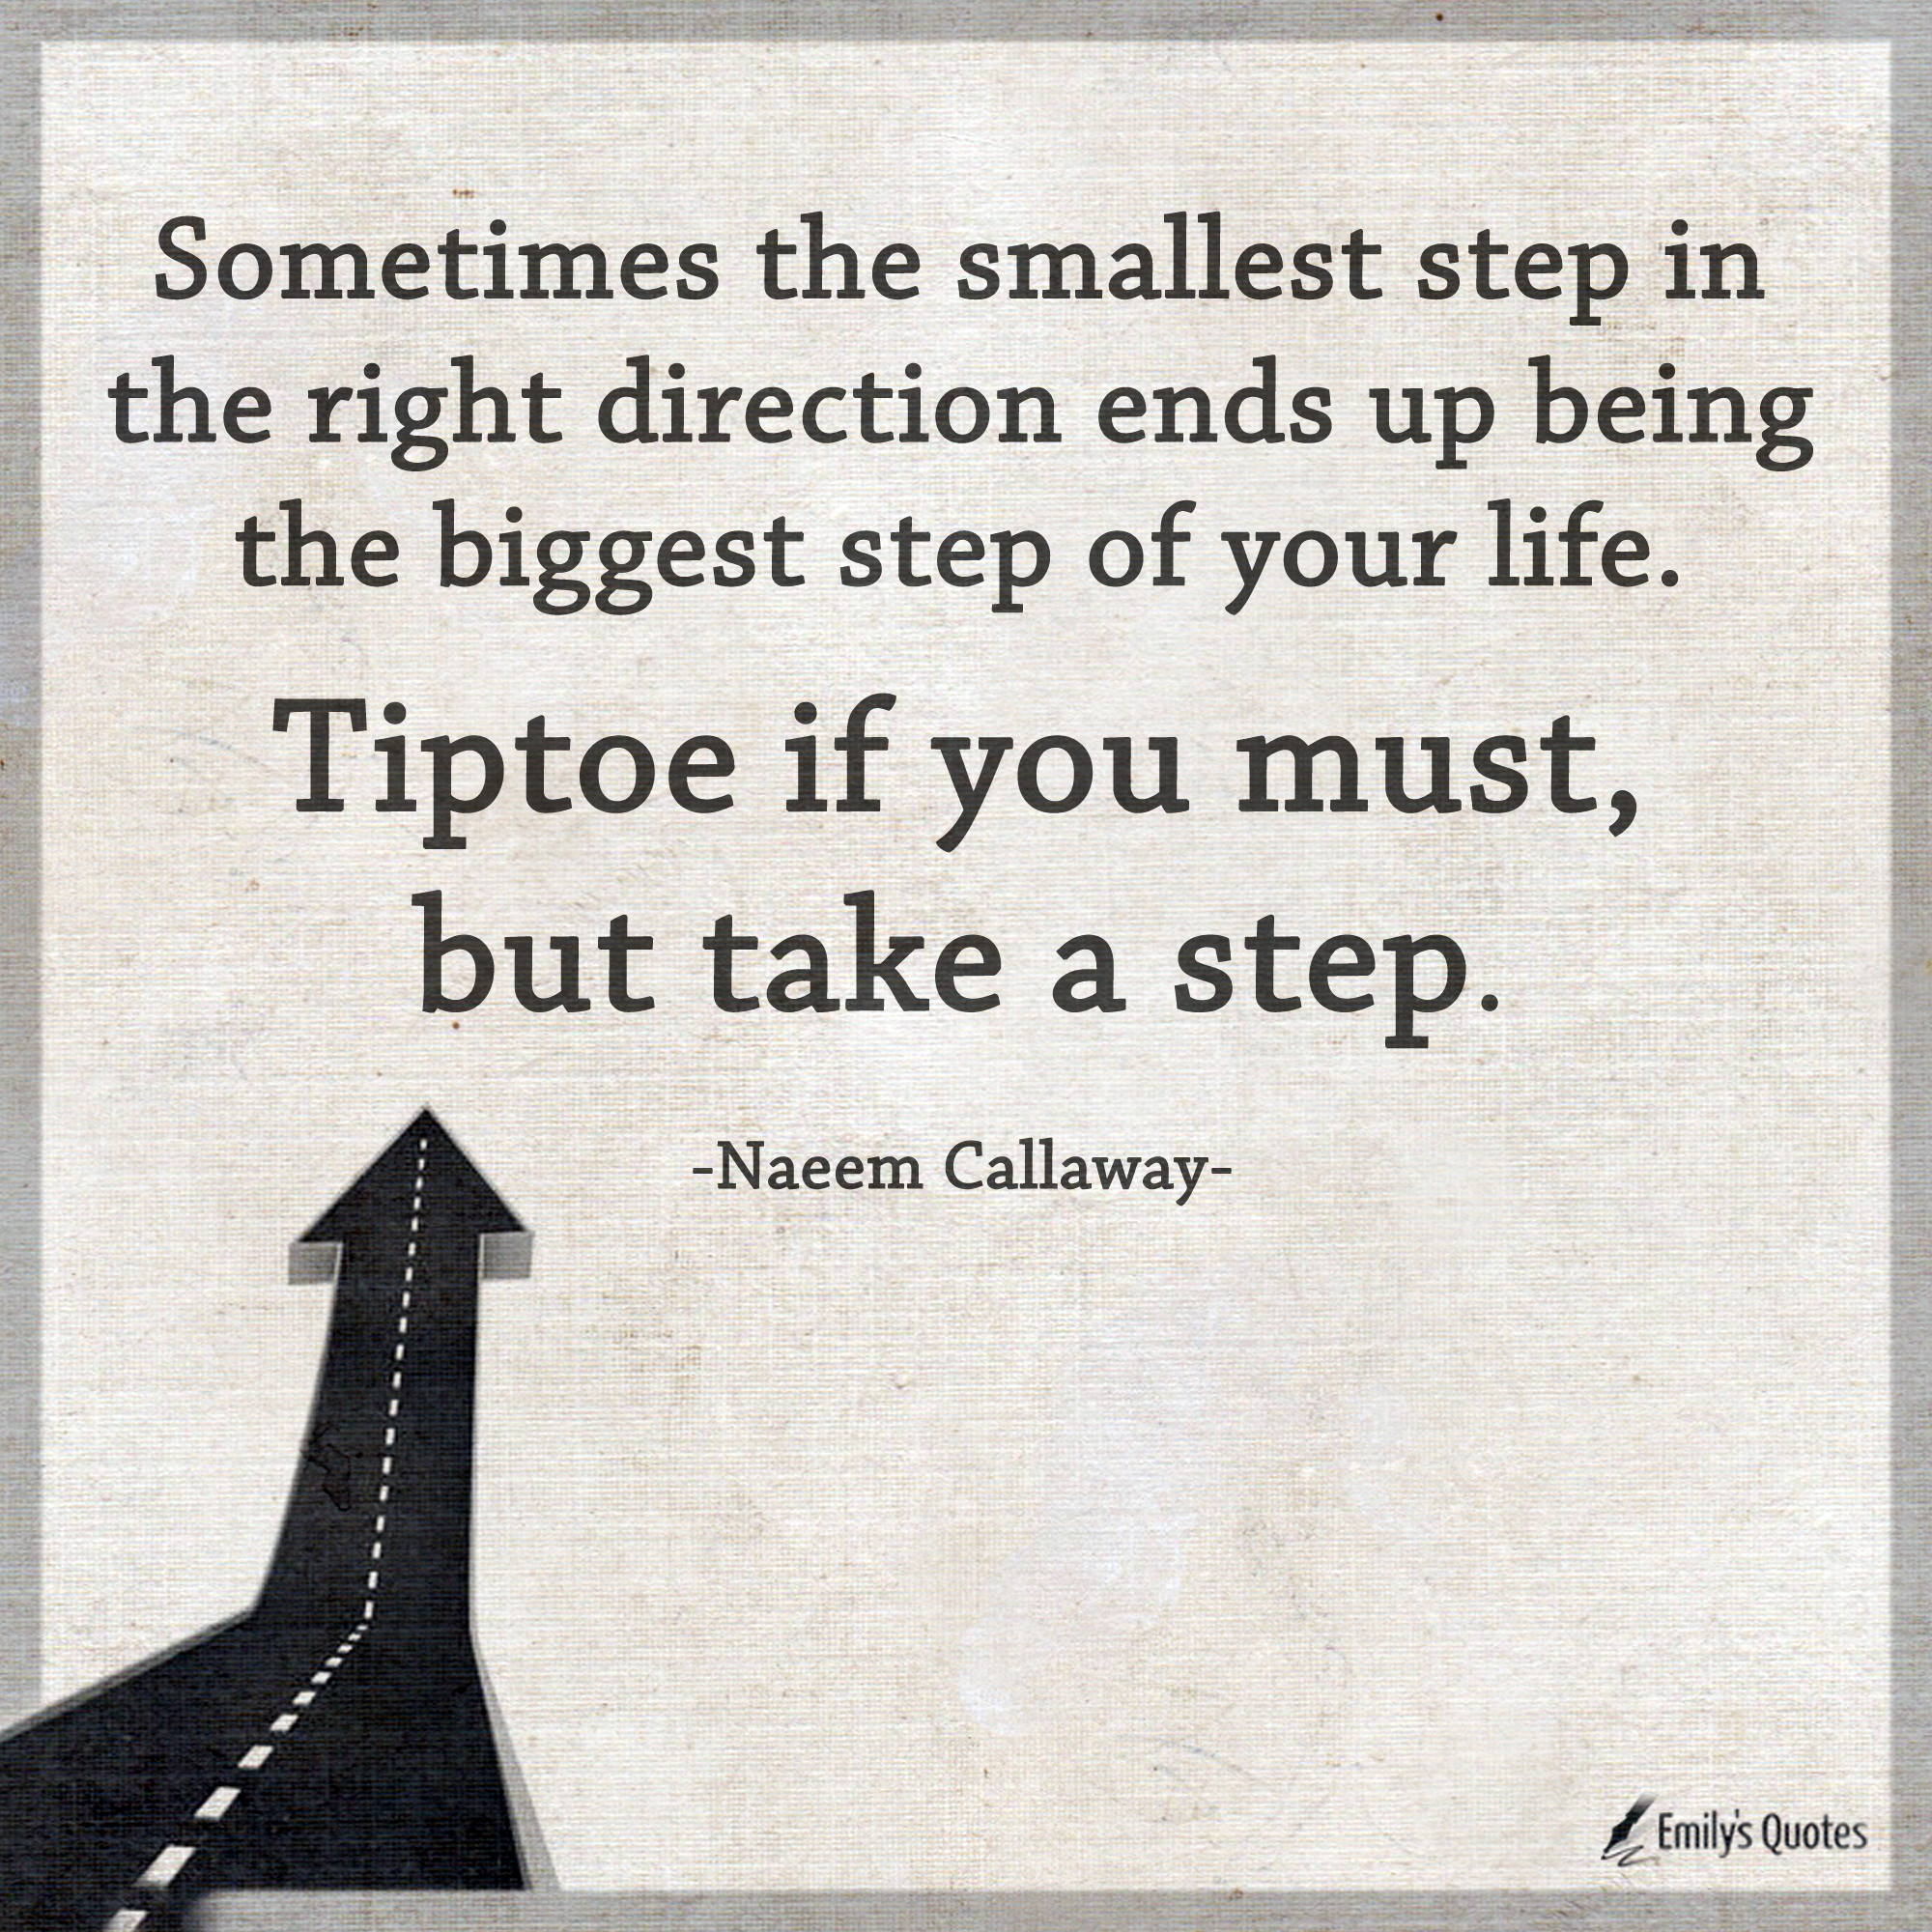 Sometimes the smallest step in the right direction ends up being the biggest step of